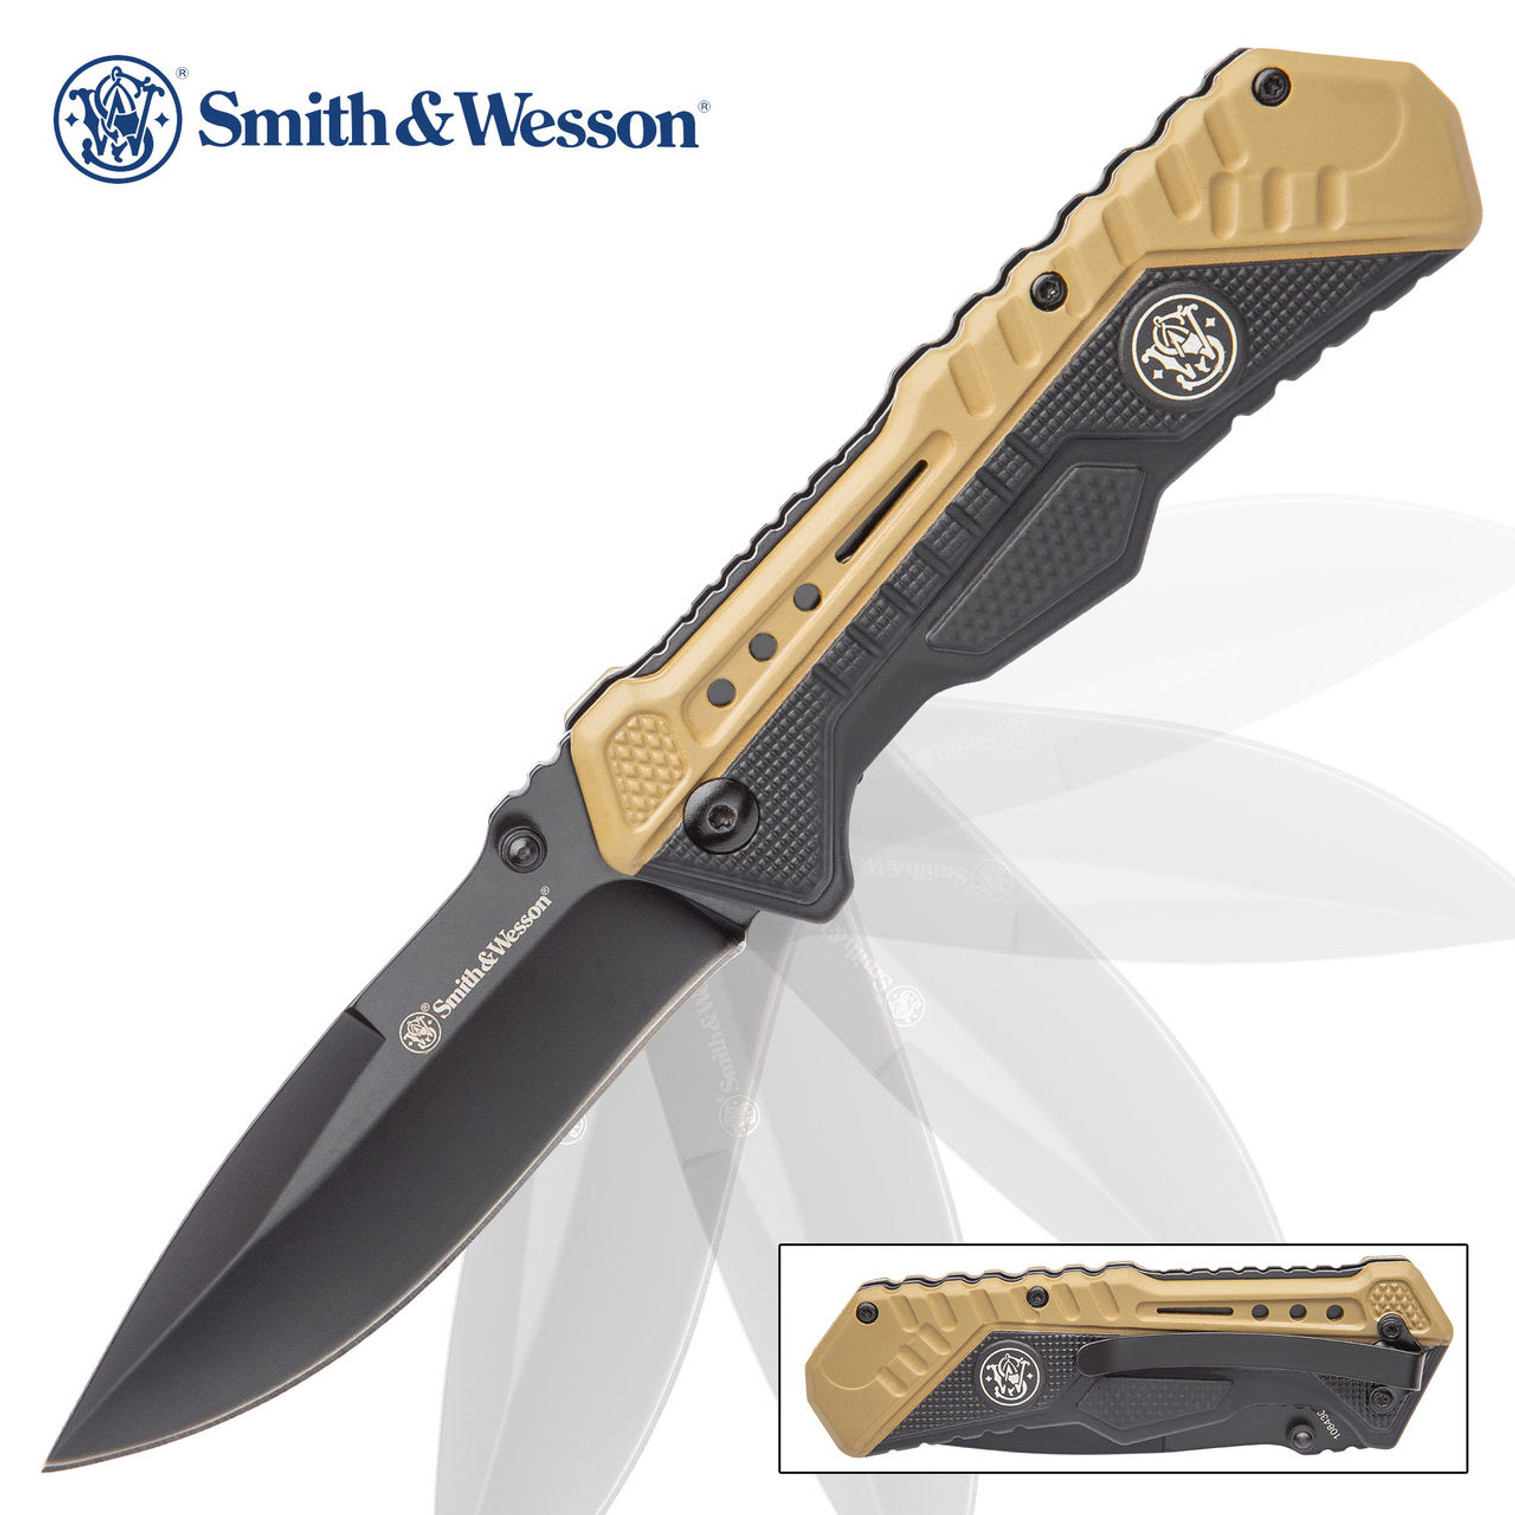 Smith & Wesson Assisted Opening Pocket Knife - Tan